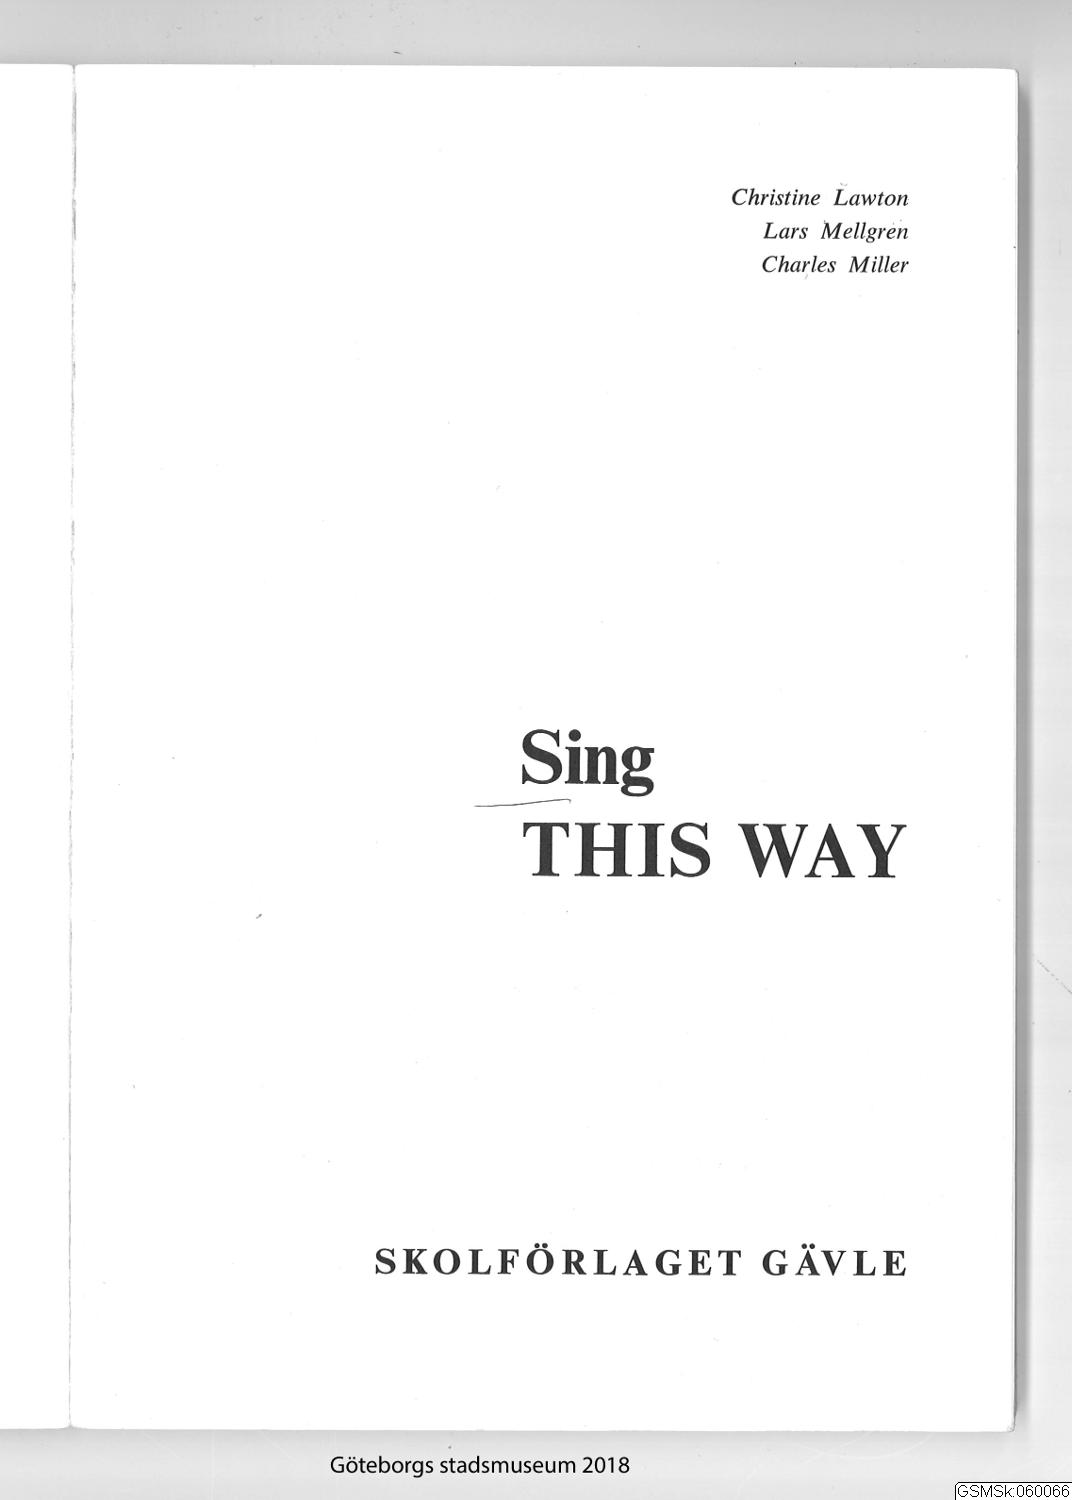 textbook, English, books, songbook, Sing this way